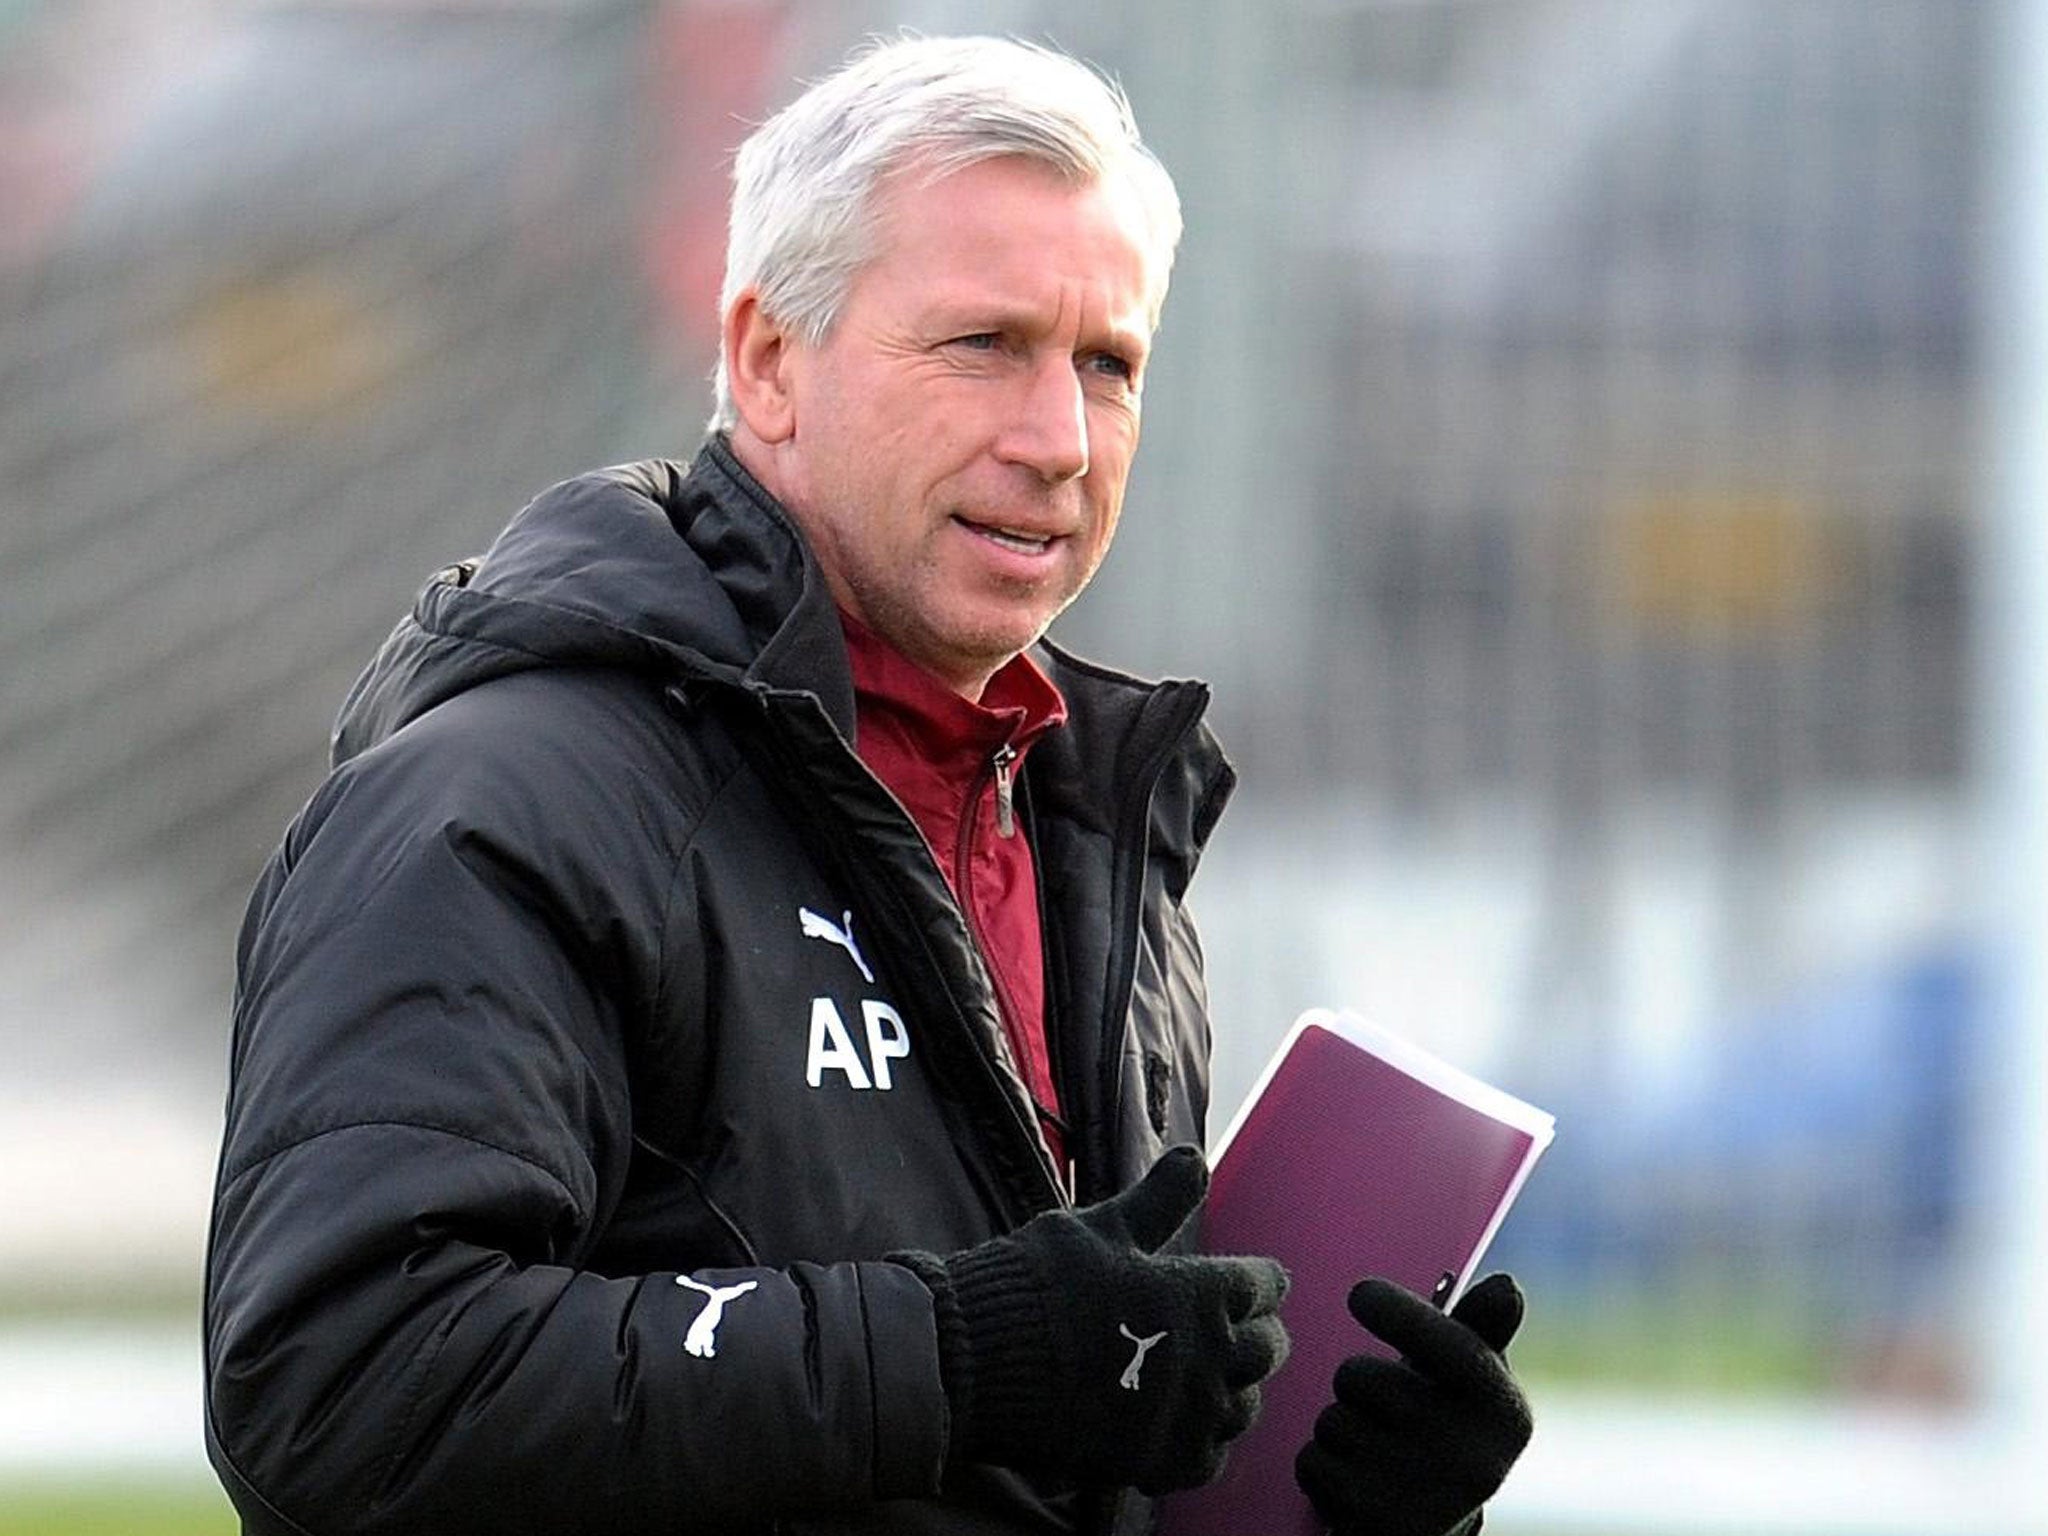 Alan Pardew: Newcastle’s manager appreciates the owner’s support